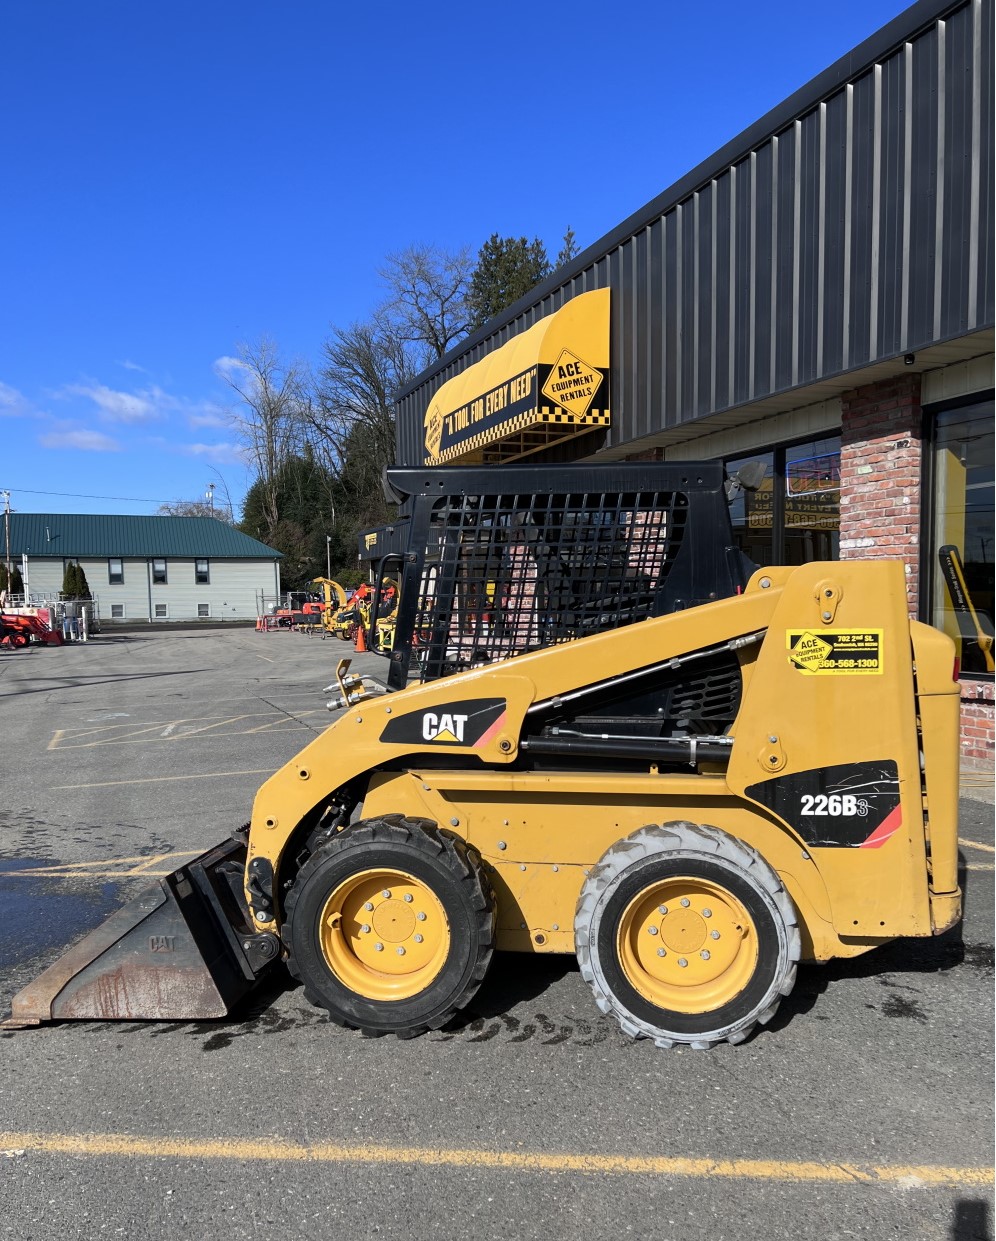 mini wheel loader rental from ace equipment rentals in snohomish, wa